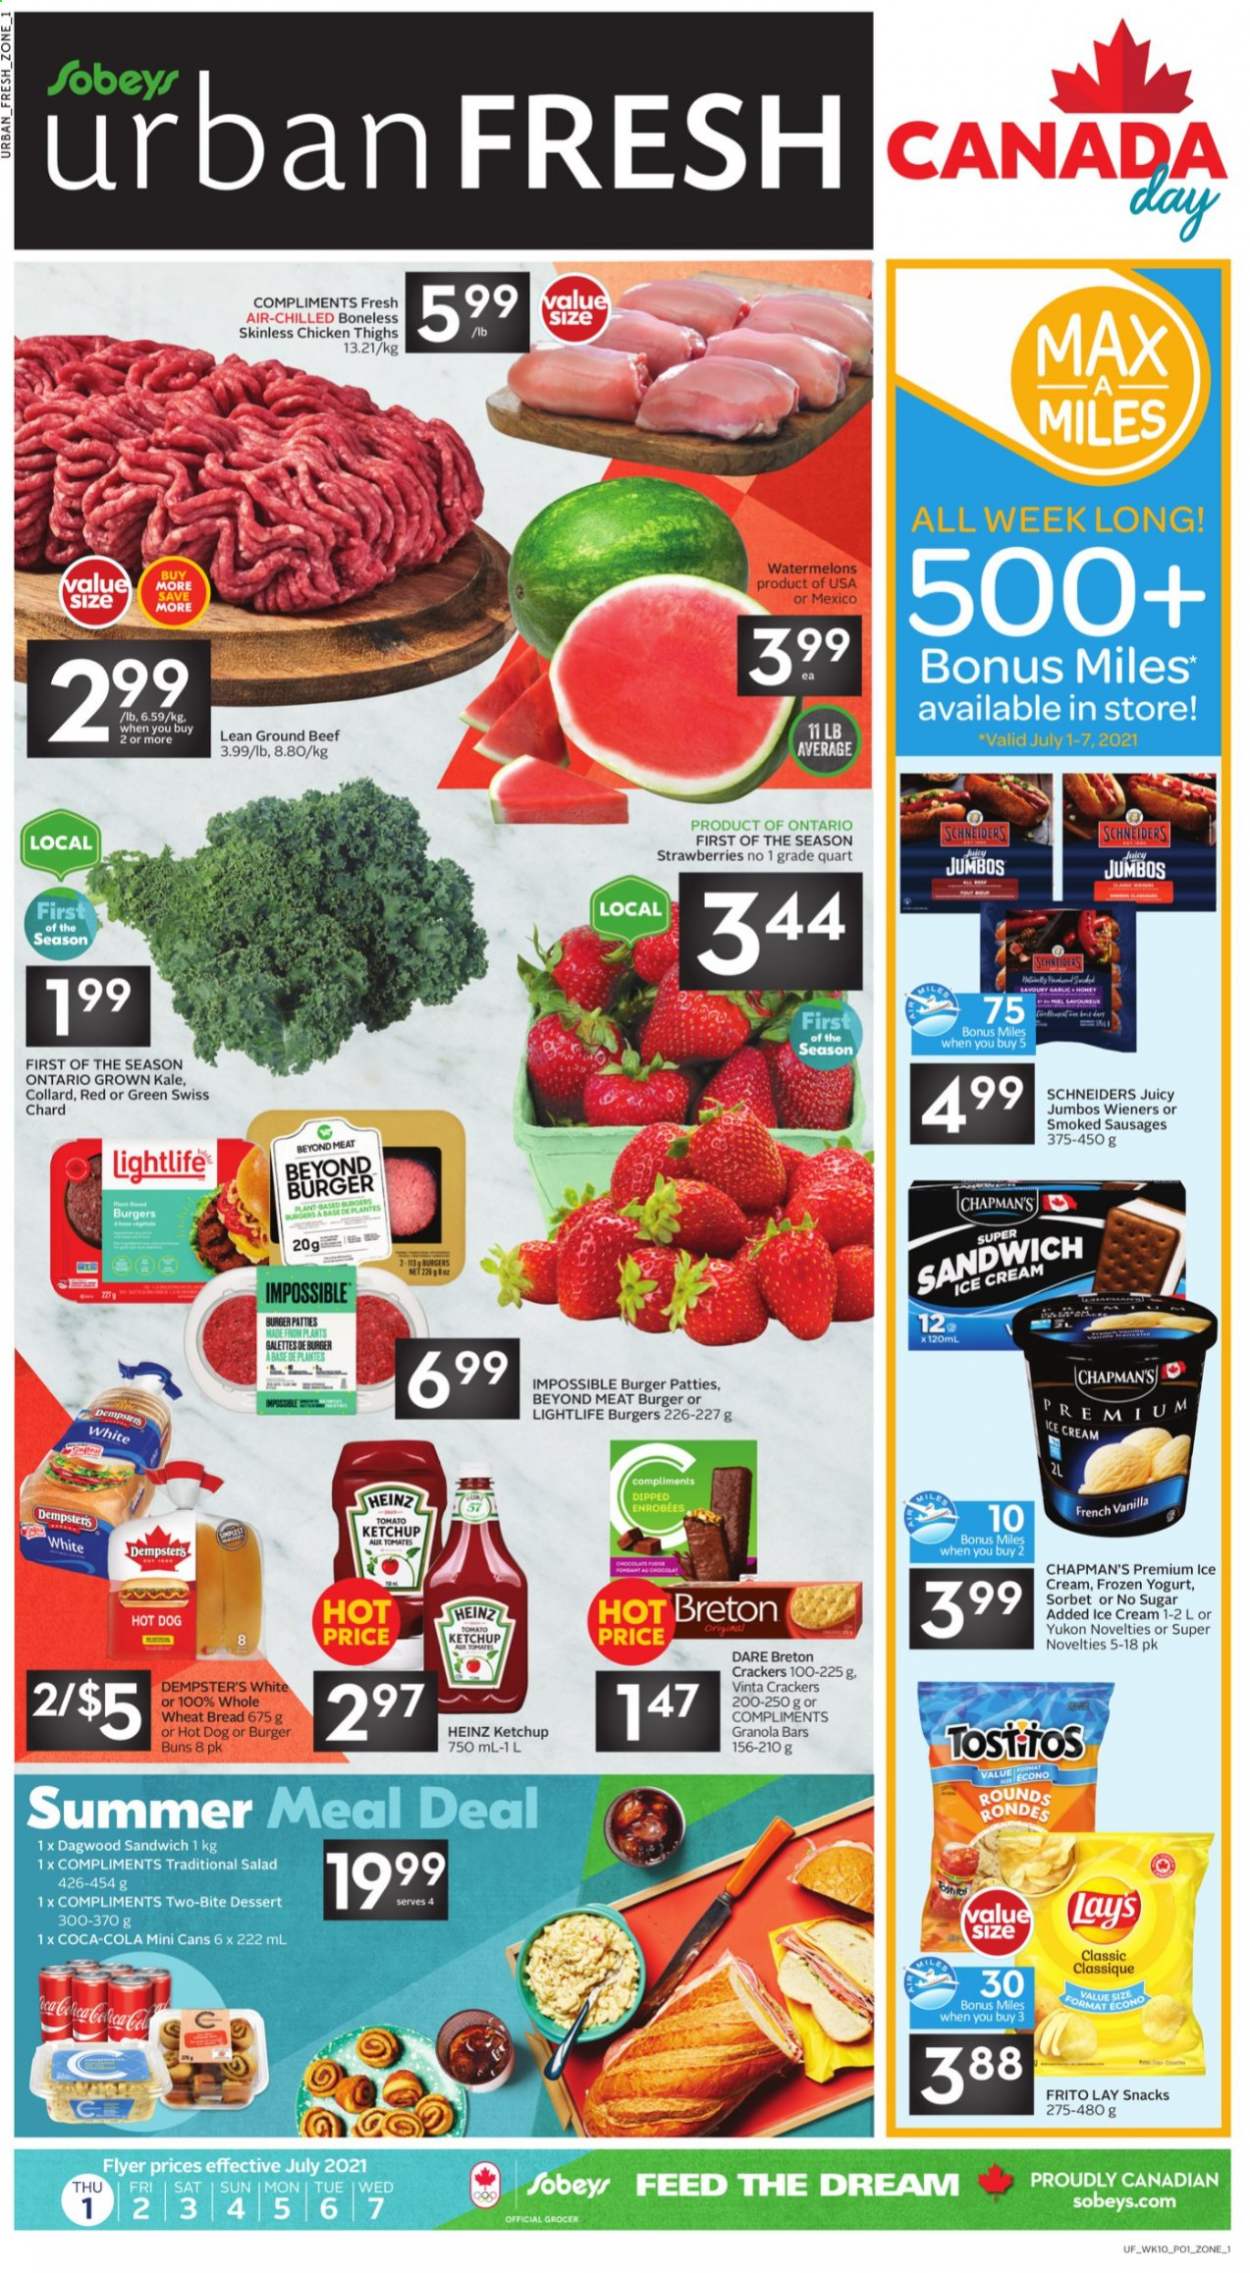 thumbnail - Sobeys Urban Fresh Flyer - July 01, 2021 - July 07, 2021 - Sales products - wheat bread, buns, burger buns, kale, strawberries, hot dog, sandwich, dagwood, sausage, yoghurt, ice cream, snack, crackers, Lay’s, Heinz, granola bar, Coca-Cola, tea, chicken thighs, chicken, beef meat, ground beef, burger patties. Page 1.